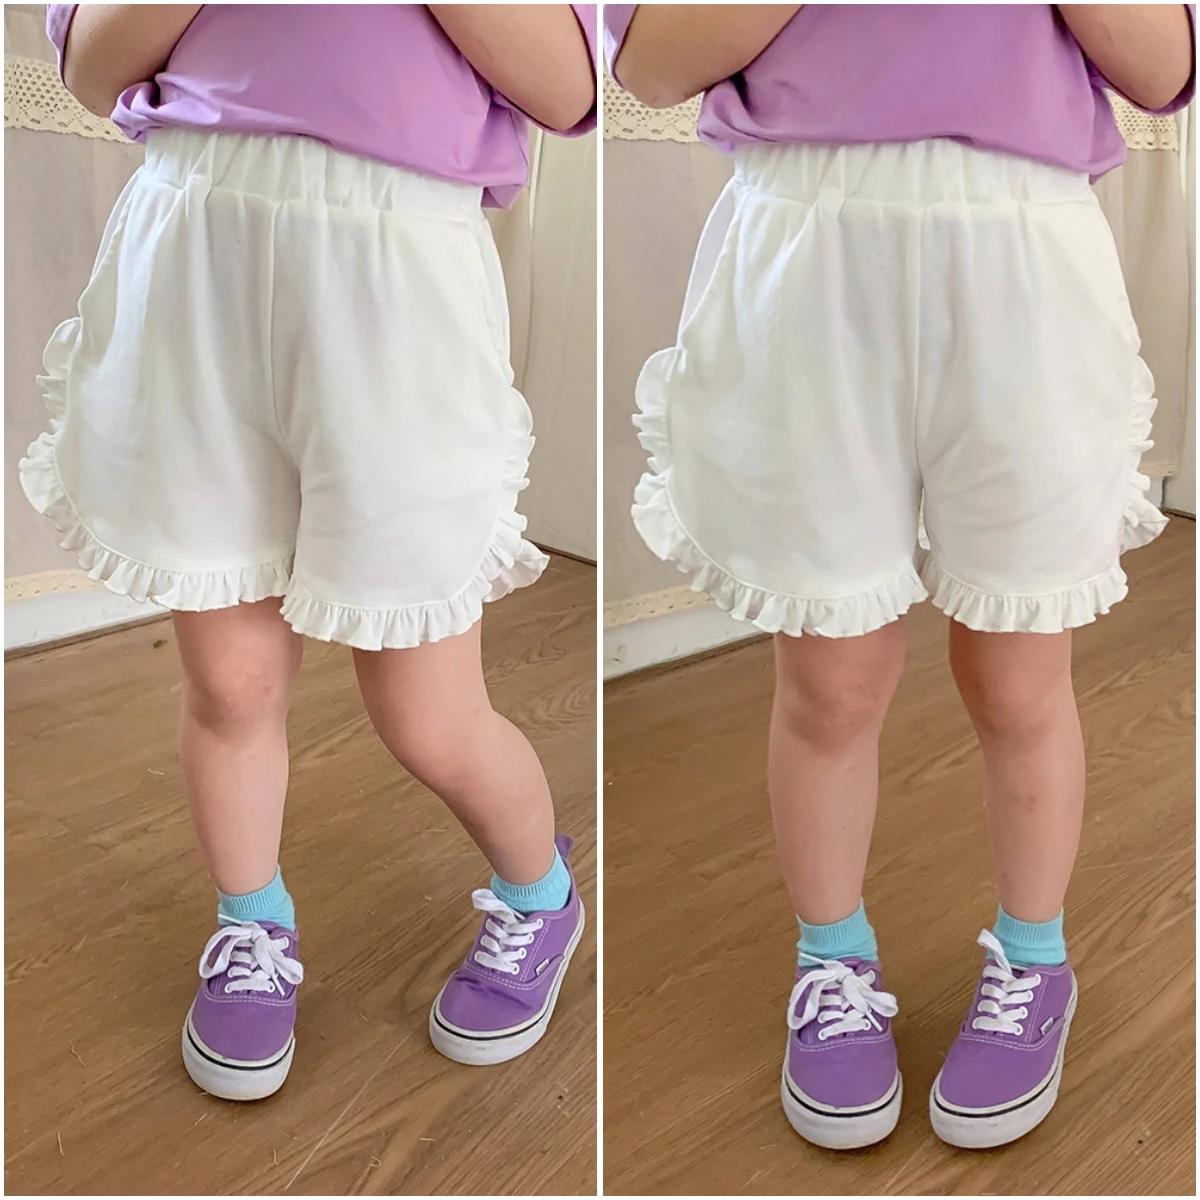 

2023 New Design Summer Knit White Shorts Little Girl 2 Years Toddler and Teenage Kids Ruffled Solid Pants Fashion Hot Shorts